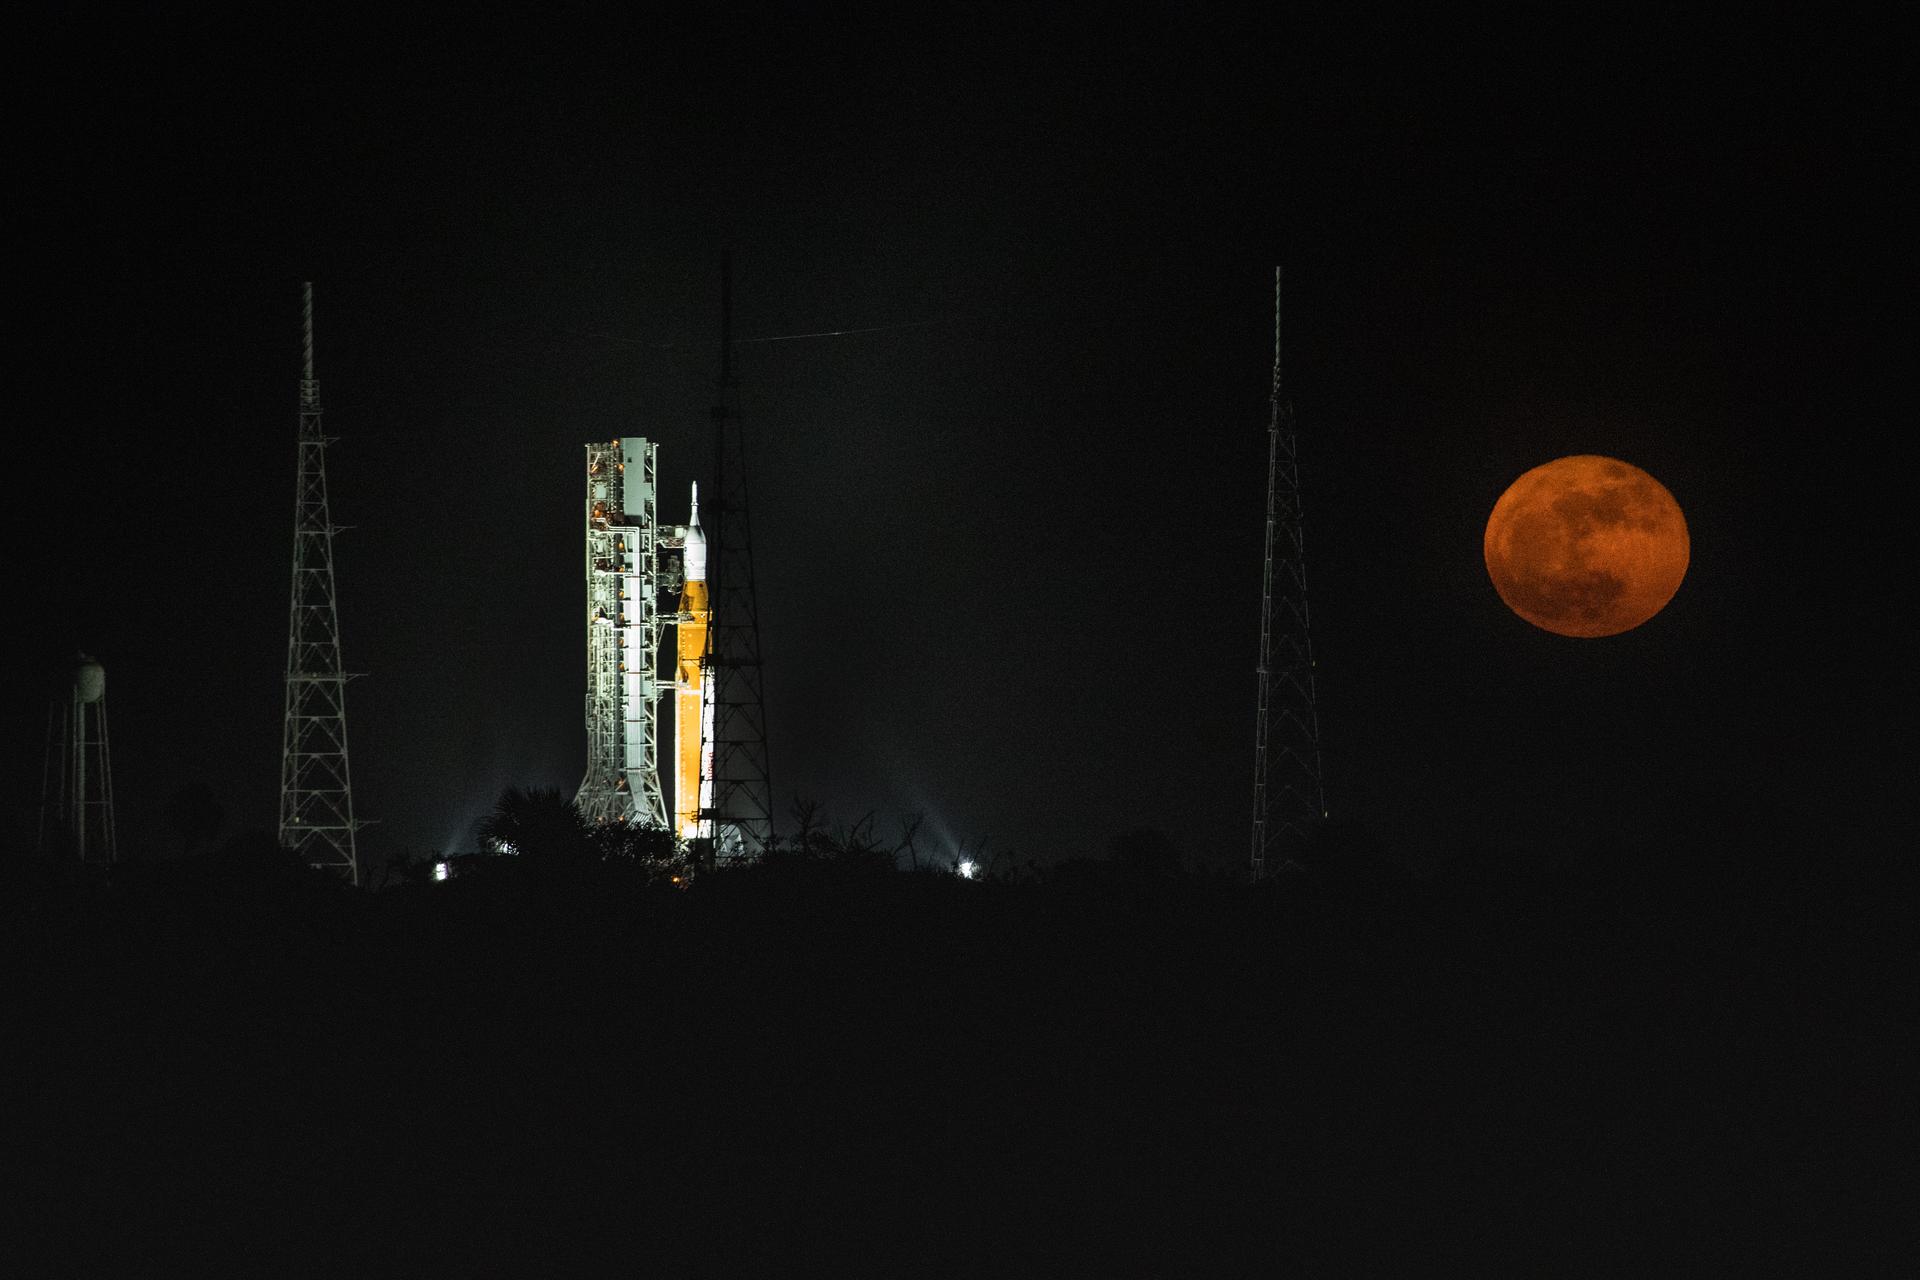 A full Moon in view with the Artemis I Space Launch System rocket and Orion spacecraft at Launch Complex 39 on June 14. 